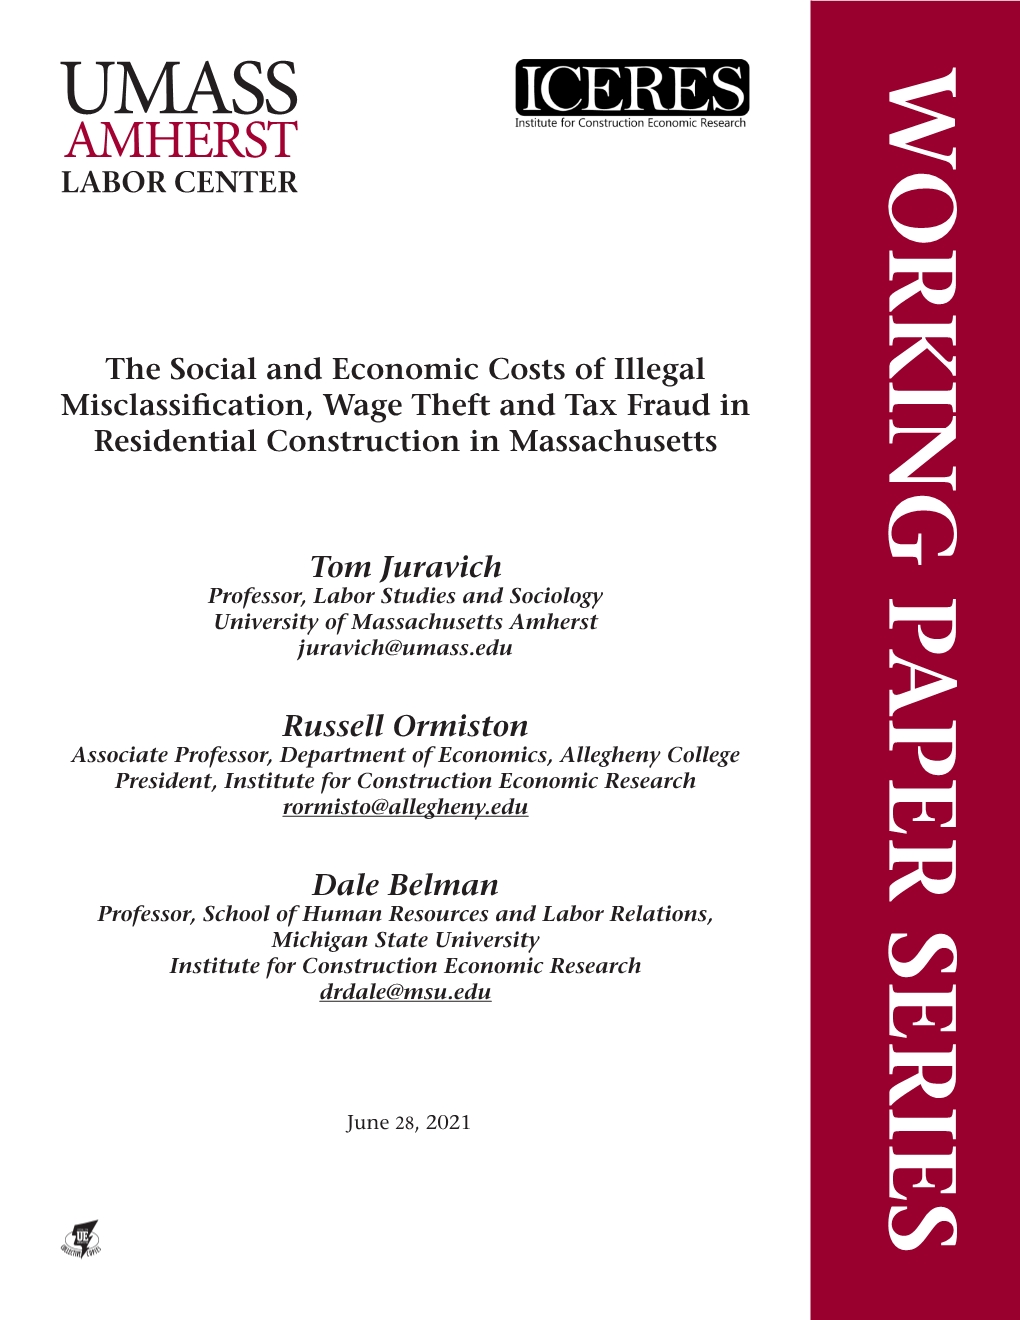 The Social and Economic Costs of Illegal Misclassification, Wage Theft and Tax Fraud in Residential Construction in Massachusetts